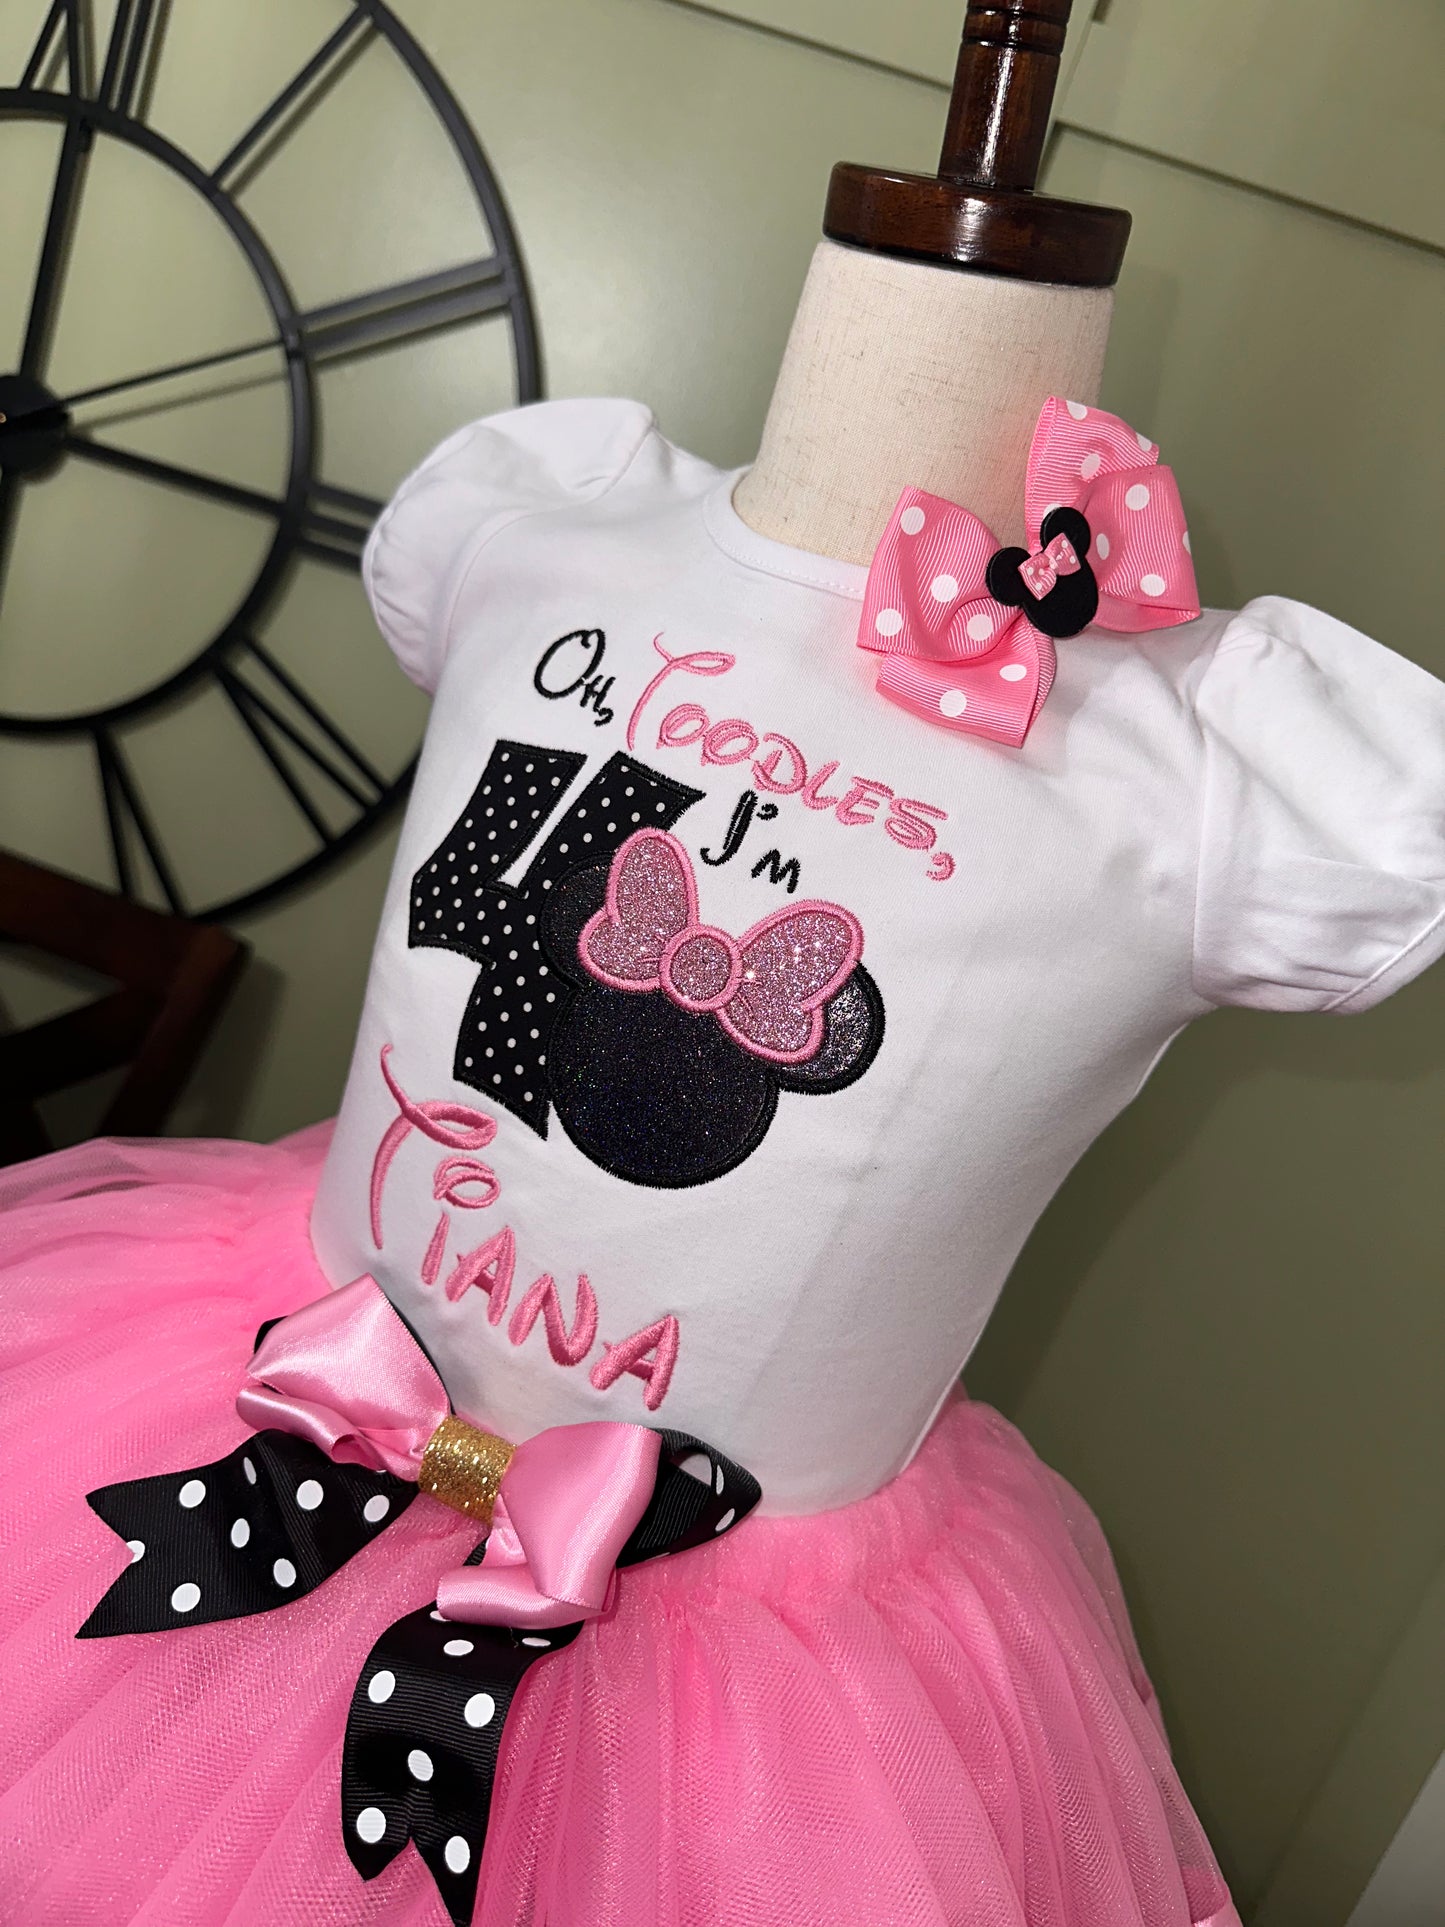 Minnie mouse birthday outfit with embroidered minnie mouse shirt